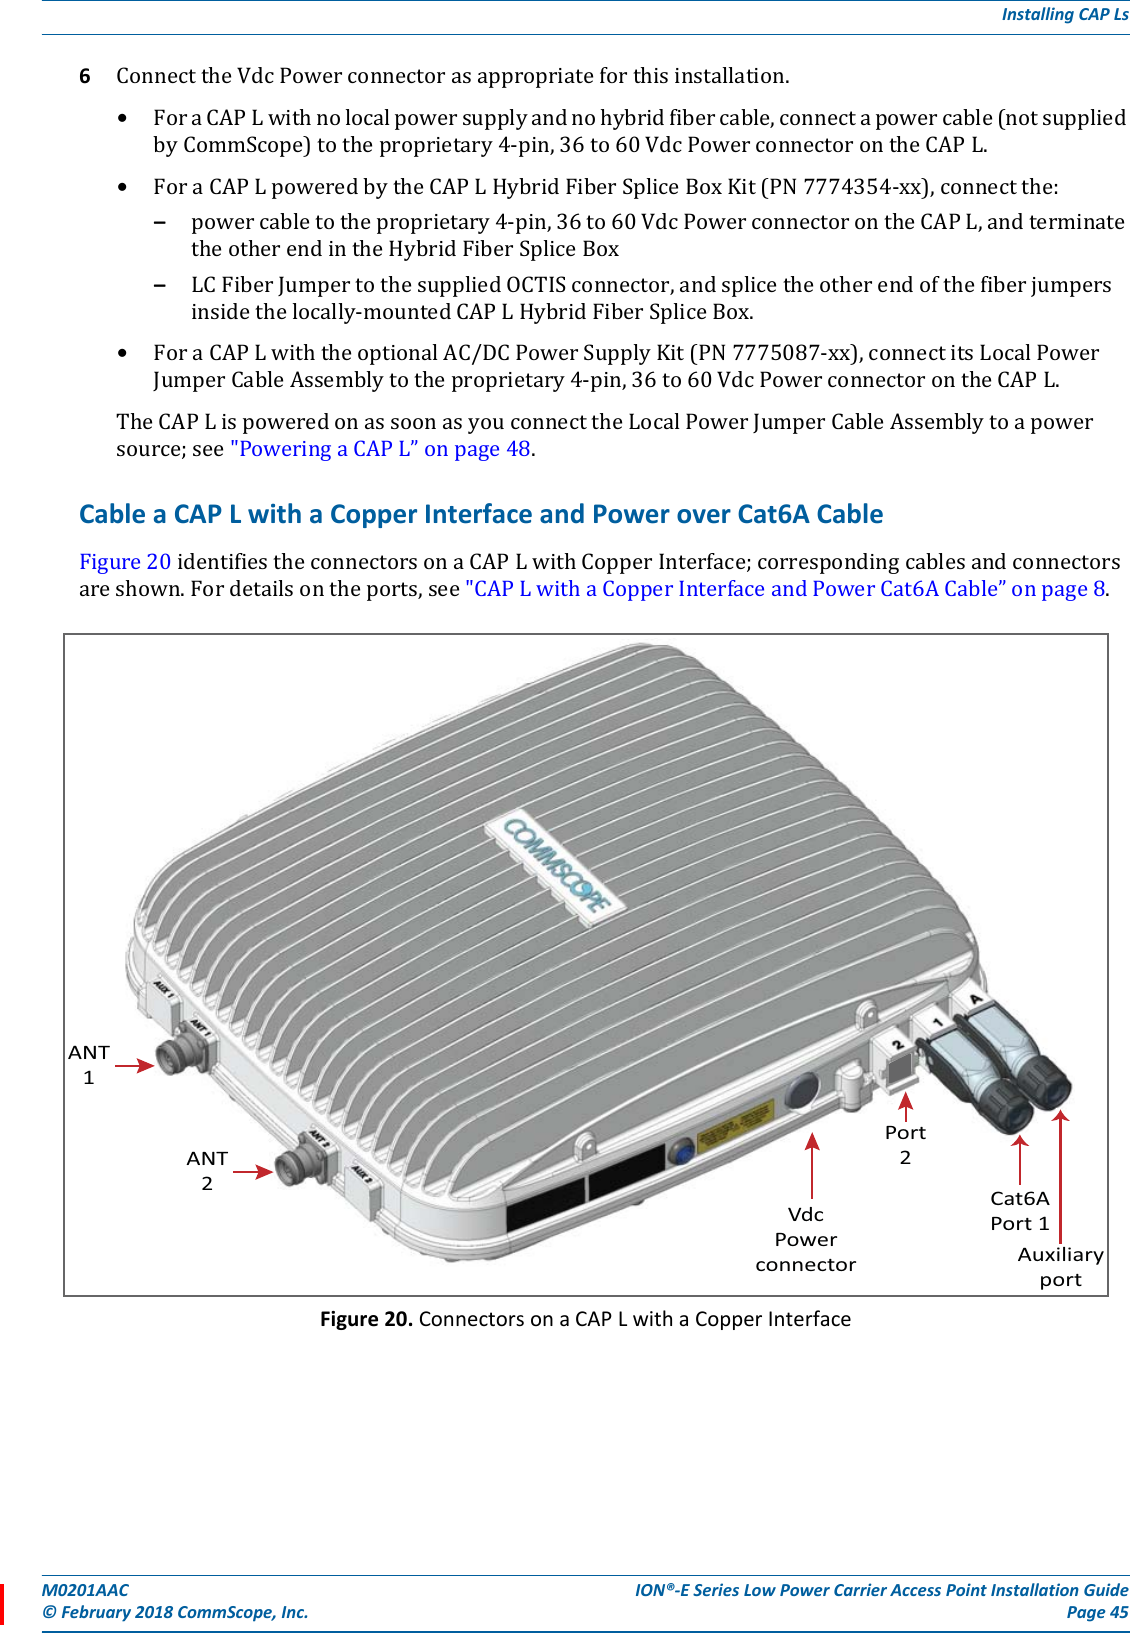 M0201AAC ION®-E Series Low Power Carrier Access Point Installation Guide© February 2018 CommScope, Inc. Page 45Installing CAP Ls6ConnecttheVdcPowerconnectorasappropriateforthisinstallation.•ForaCAPLwithnolocalpowersupplyandnohybridfibercable,connectapowercable(notsuppliedbyCommScope)totheproprietary4-pin,36to60VdcPowerconnectorontheCAPL.•ForaCAPLpoweredbytheCAPLHybridFiberSpliceBoxKit(PN7774354-xx),connectthe:–powercabletotheproprietary4-pin,36to60VdcPowerconnectorontheCAPL,andterminatetheotherendintheHybridFiberSpliceBox–LCFiberJumpertothesuppliedOCTISconnector,andsplicetheotherendofthefiberjumpersinsidethelocally-mountedCAPLHybridFiberSpliceBox.•ForaCAPLwiththeoptionalAC/DCPowerSupplyKit(PN7775087-xx),connectitsLocalPowerJumperCableAssemblytotheproprietary4-pin,36to60VdcPowerconnectorontheCAPL.TheCAPLispoweredonassoonasyouconnecttheLocalPowerJumperCableAssemblytoapowersource;see&quot;PoweringaCAPL”onpage48.Cable a CAP L with a Copper Interface and Power over Cat6A CableFigure20identifiestheconnectorsonaCAPLwithCopperInterface;correspondingcablesandconnectorsareshown.Fordetailsontheports,see&quot;CAPLwithaCopperInterfaceandPowerCat6ACable”onpage8.Figure 20. Connectors on a CAP L with a Copper InterfaceANT1ANT2VdcPowerconnector AuxiliaryportCat6APort 1Port2